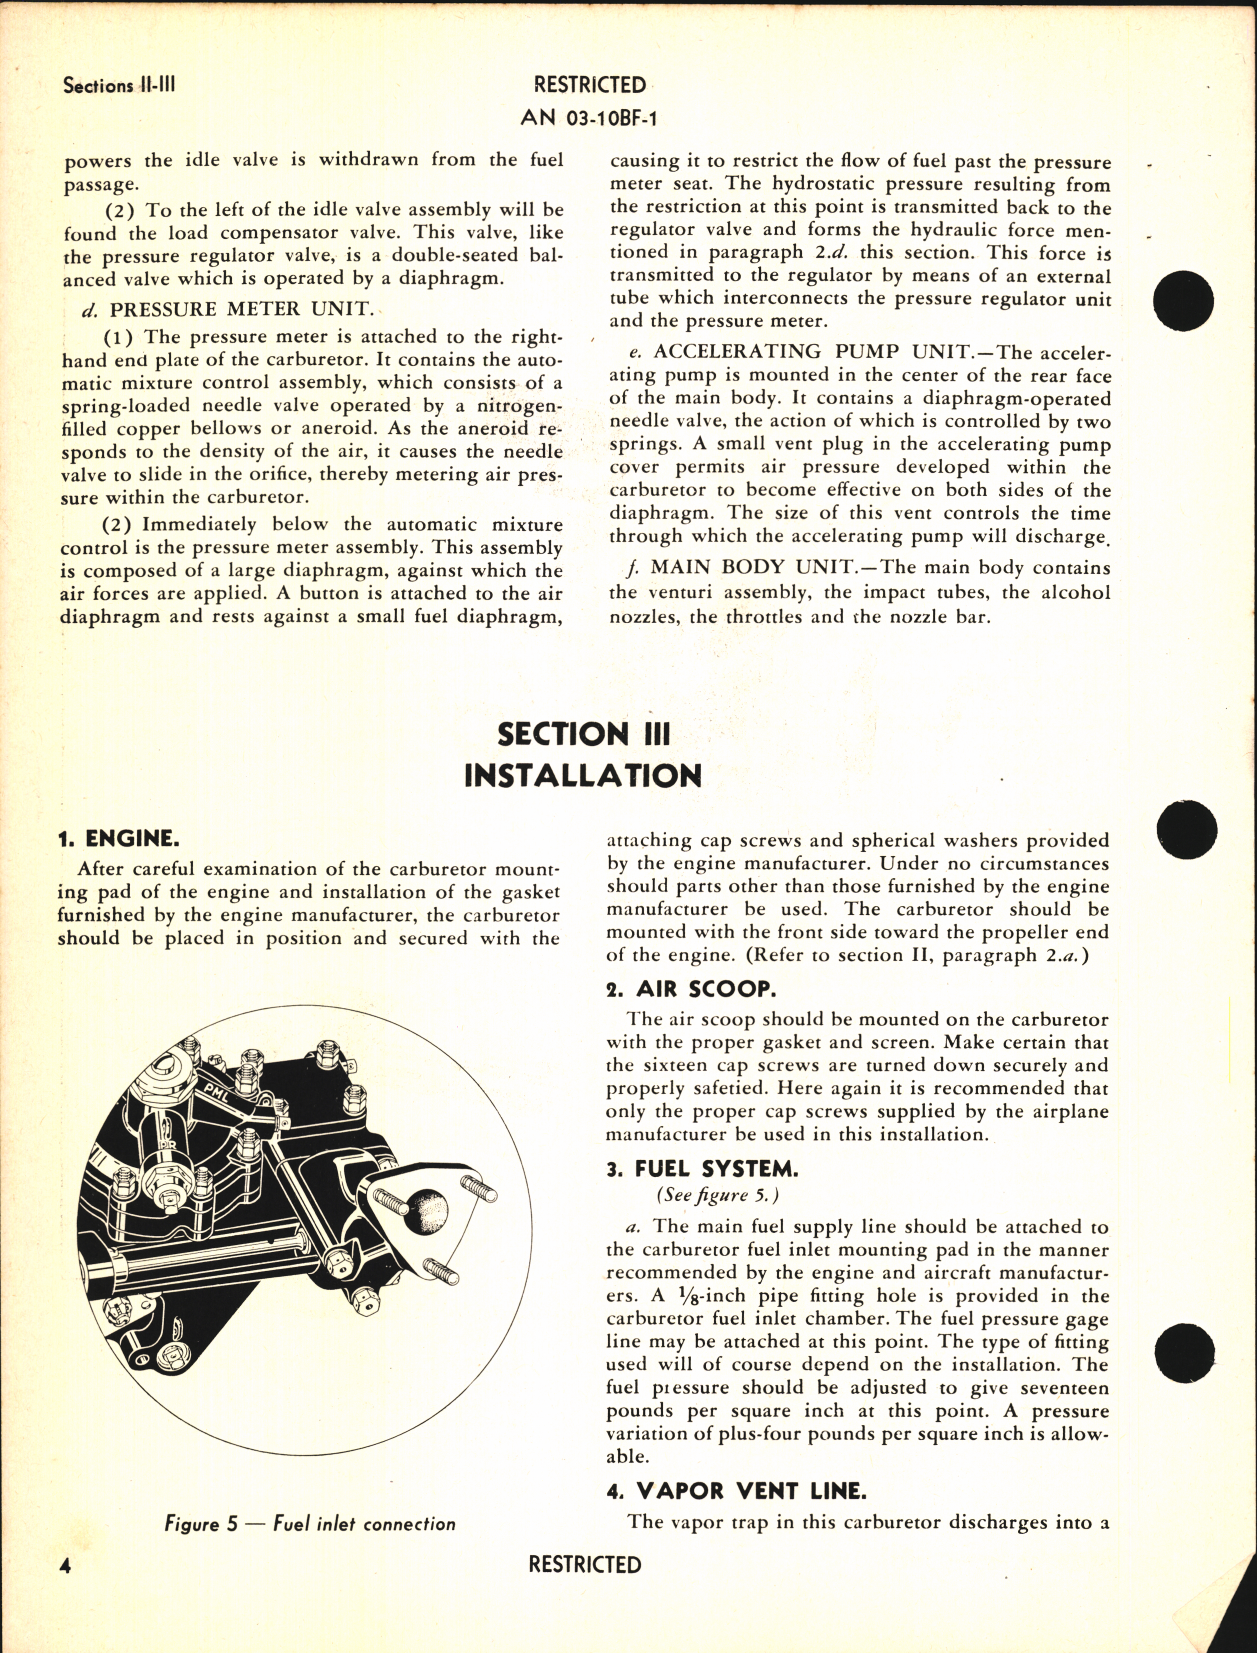 Sample page 8 from AirCorps Library document: Handbook of Instructions with Parts Catalog for Hydro-Metering Carburetor Model 58CPB-4